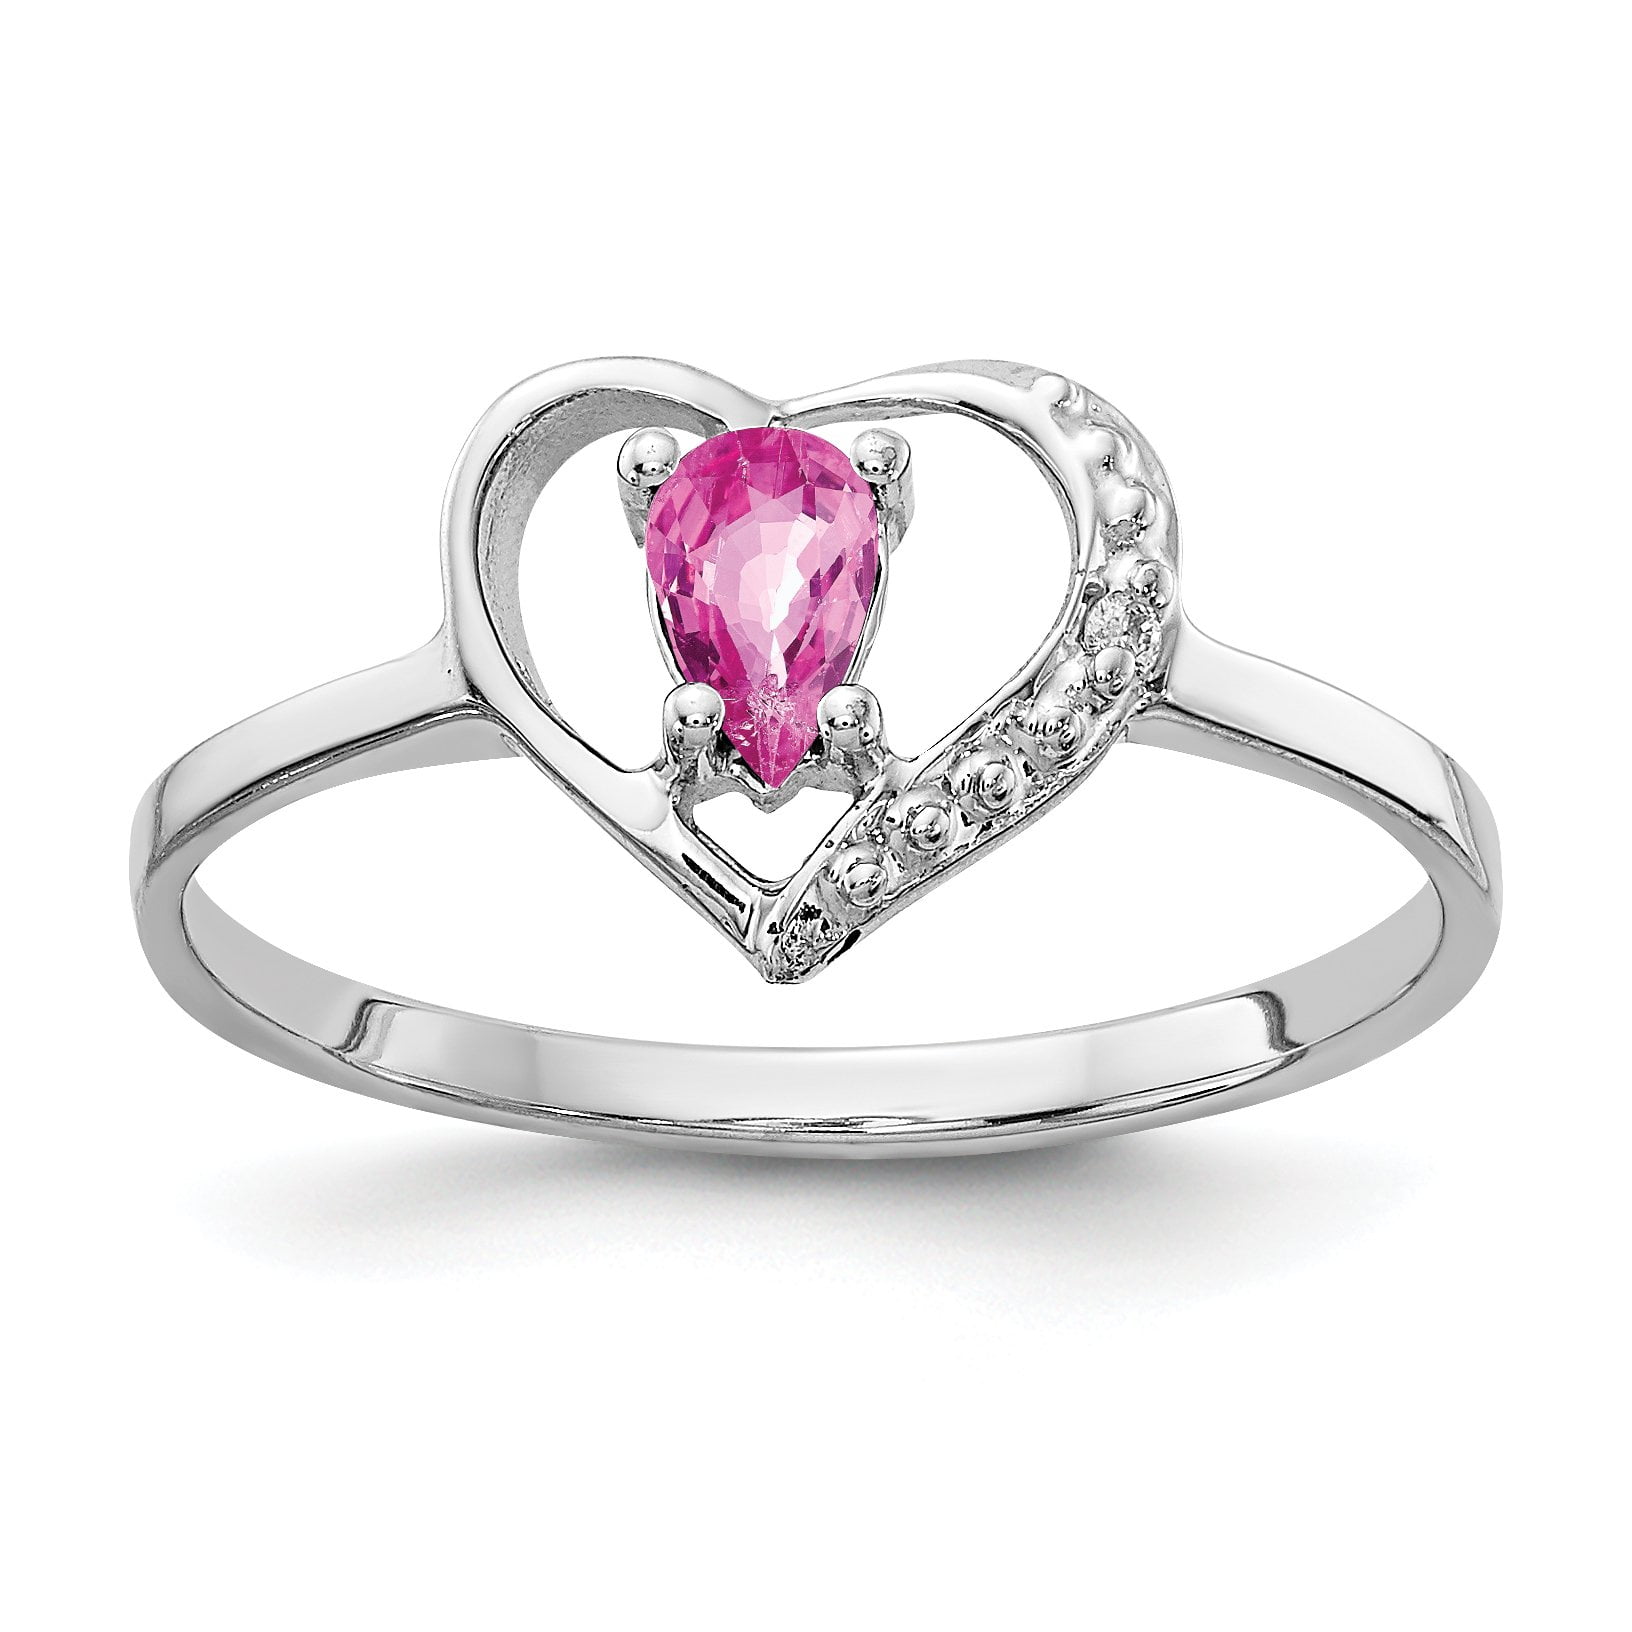 Jewelry Adviser Rings 14k White Gold 5x3mm Pear Pink Sapphire AA Diamond ring Diamond quality AA I1 clarity, G-I color 